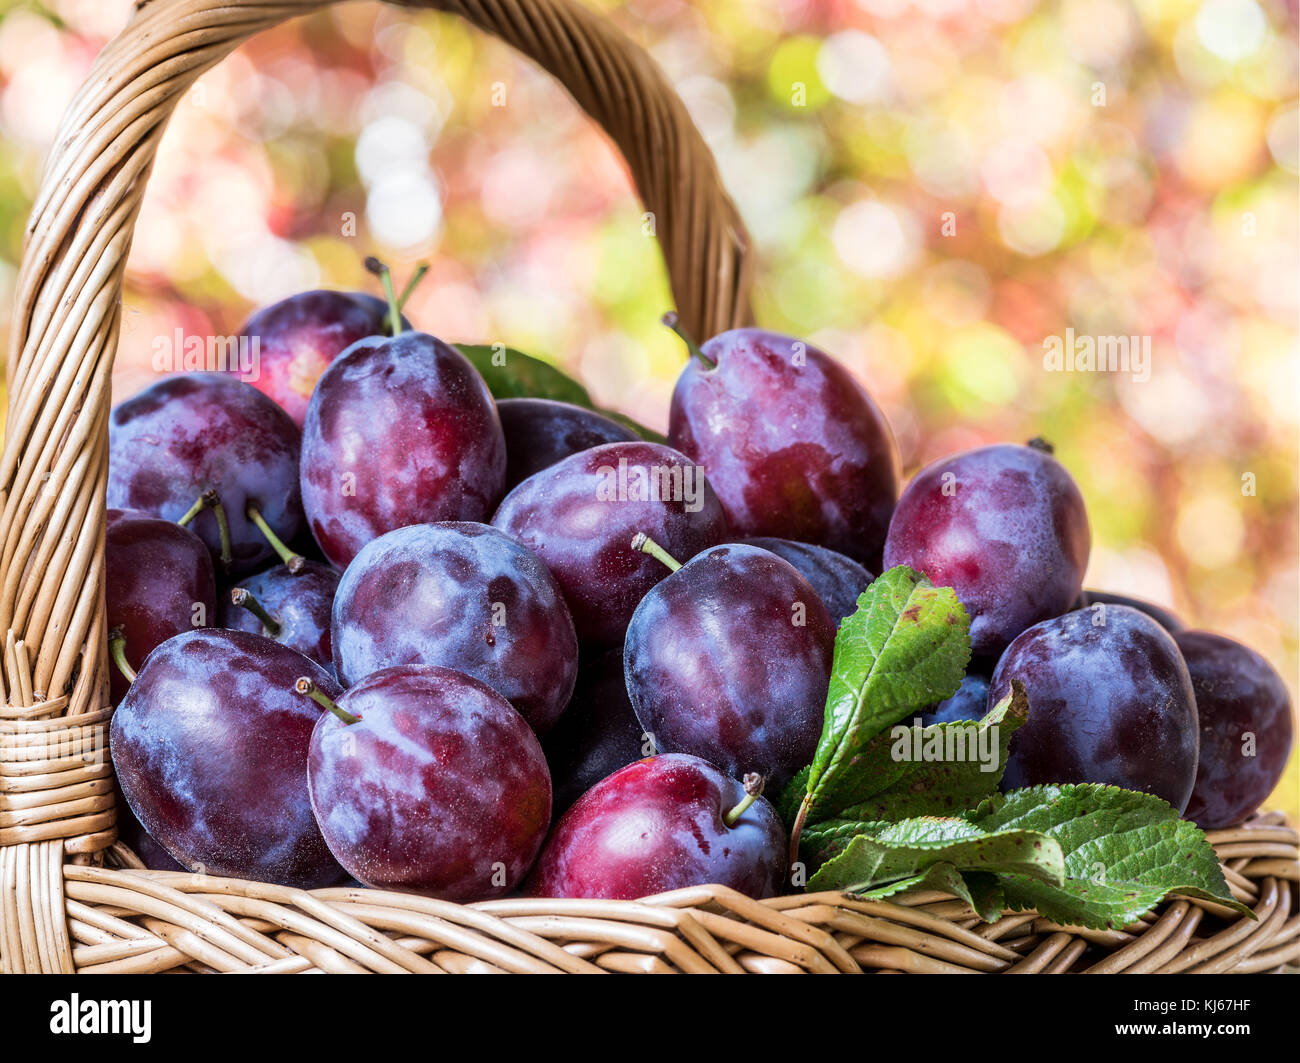 Plum harvest. Ripe plums in the basket on the table. Autumn garden at the background. Stock Photo